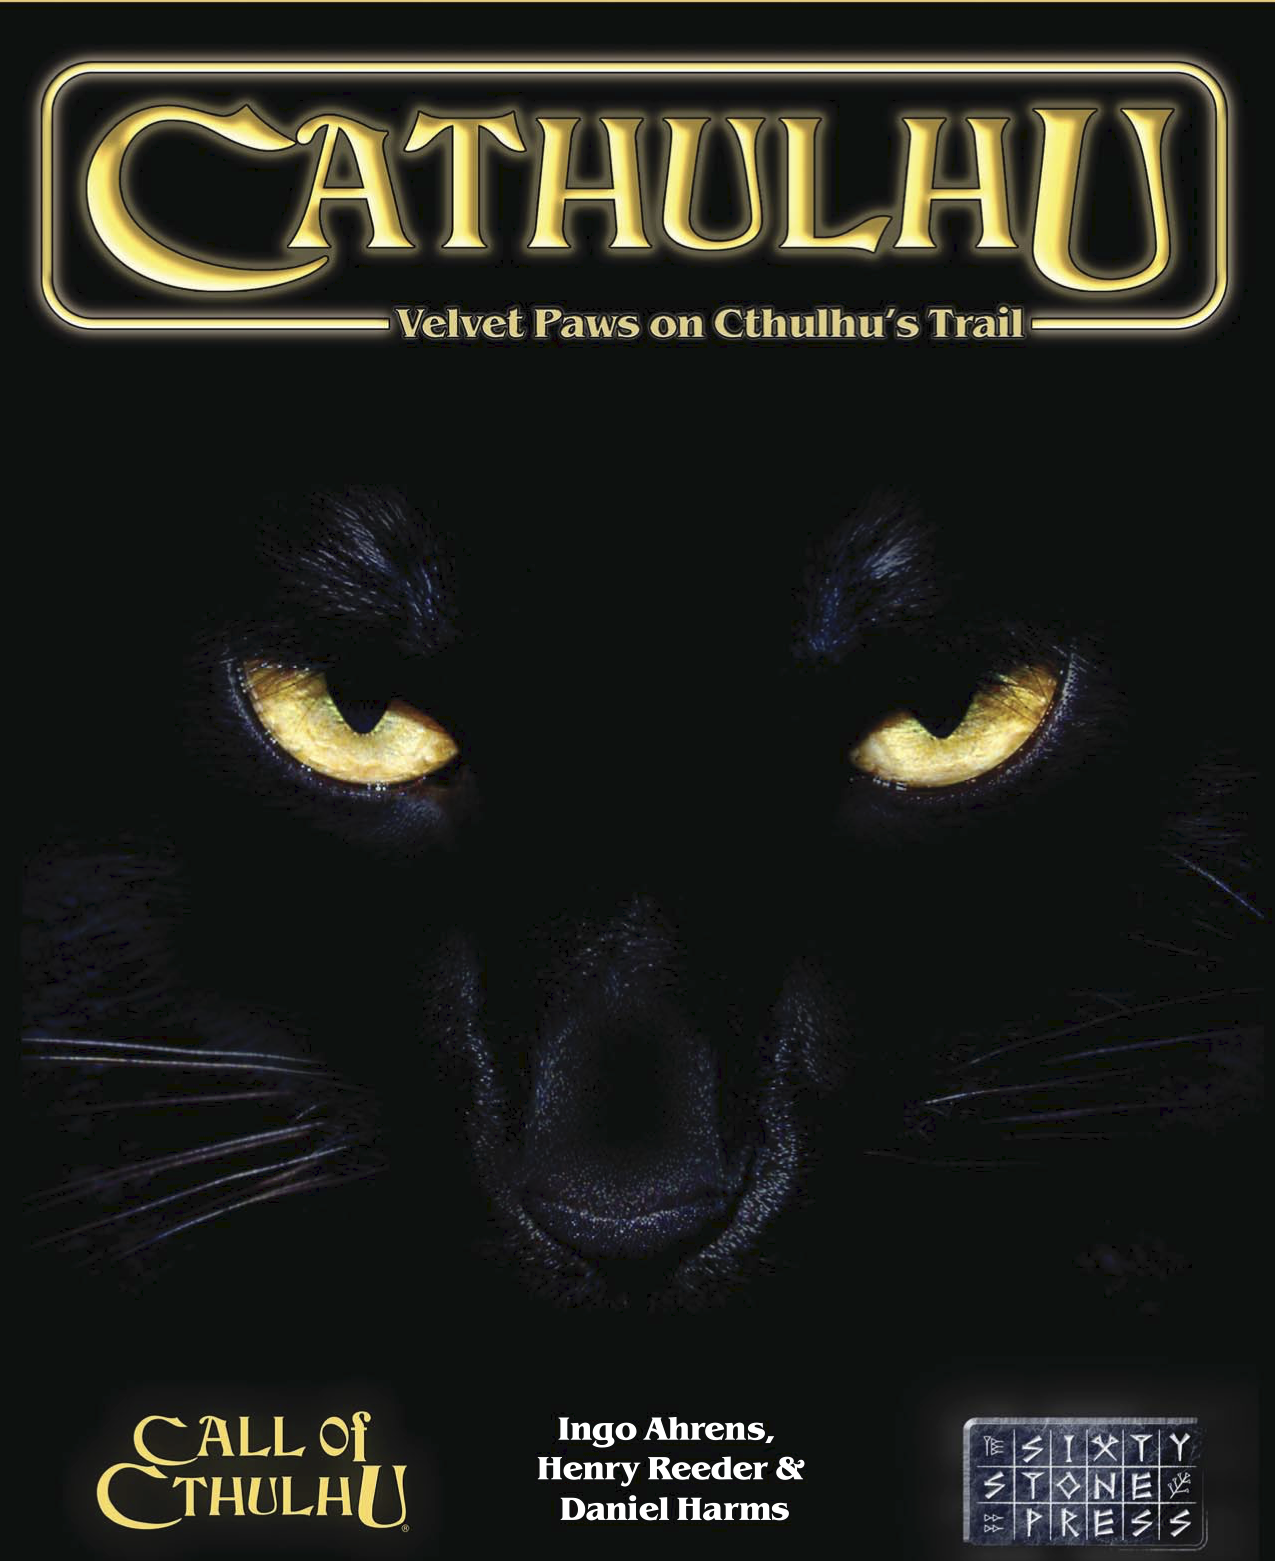 cathulhu-7th-cover.png